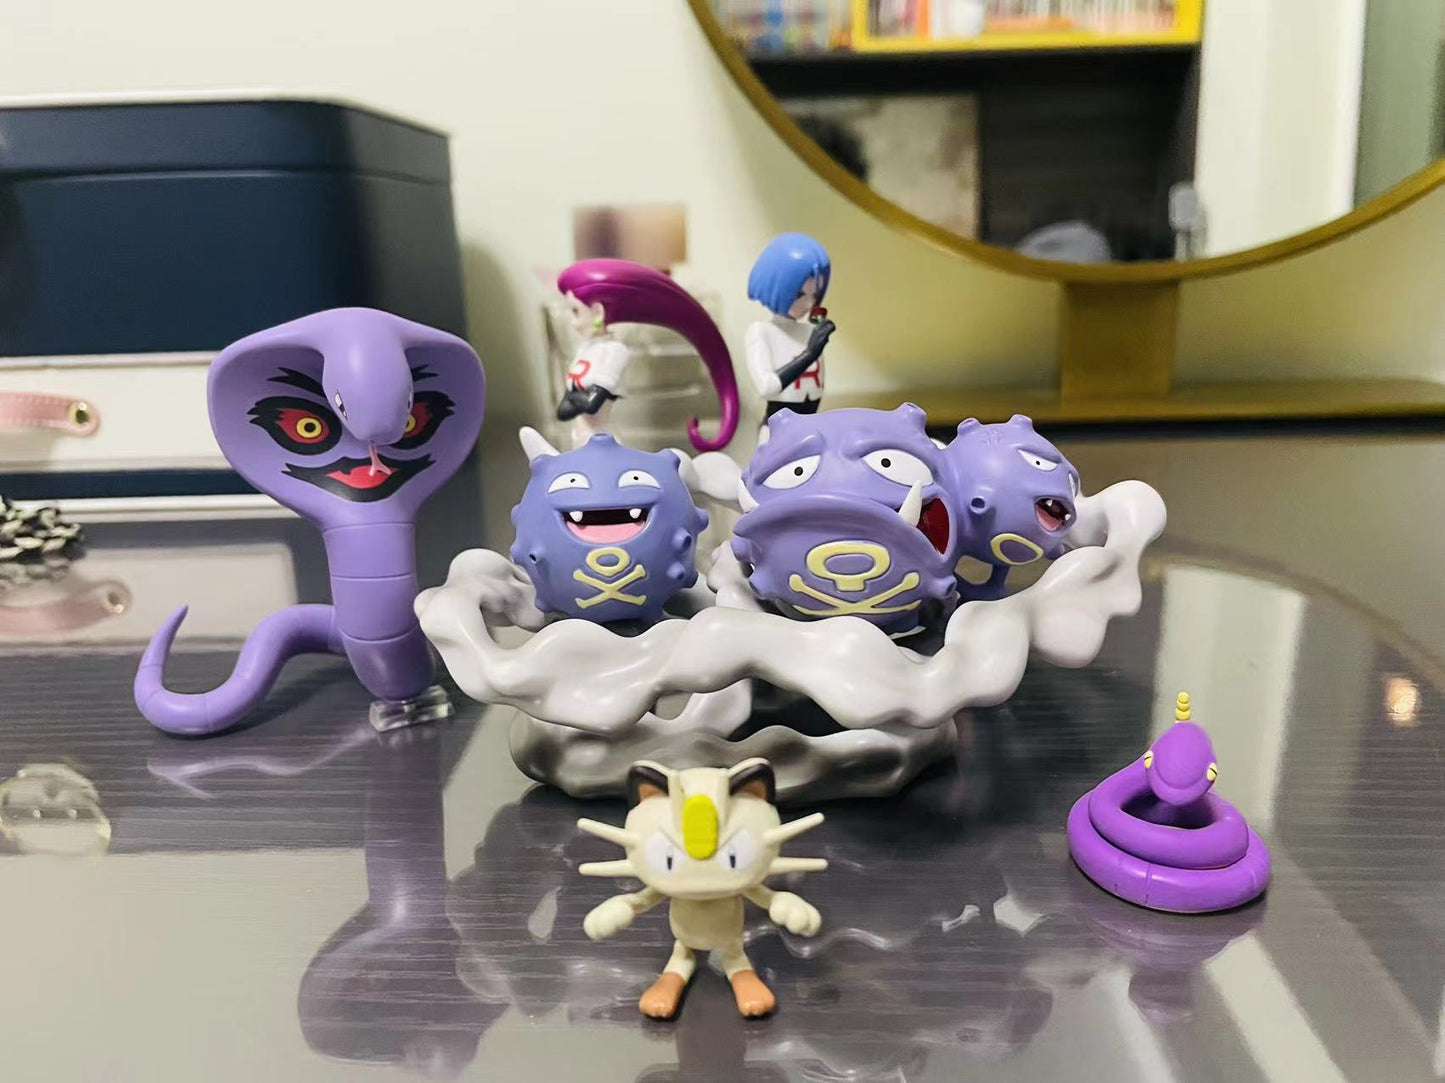 〖Sold Out〗Pokemon Scale World Koffing Weezing #109 #110 1:20 - XO Studio